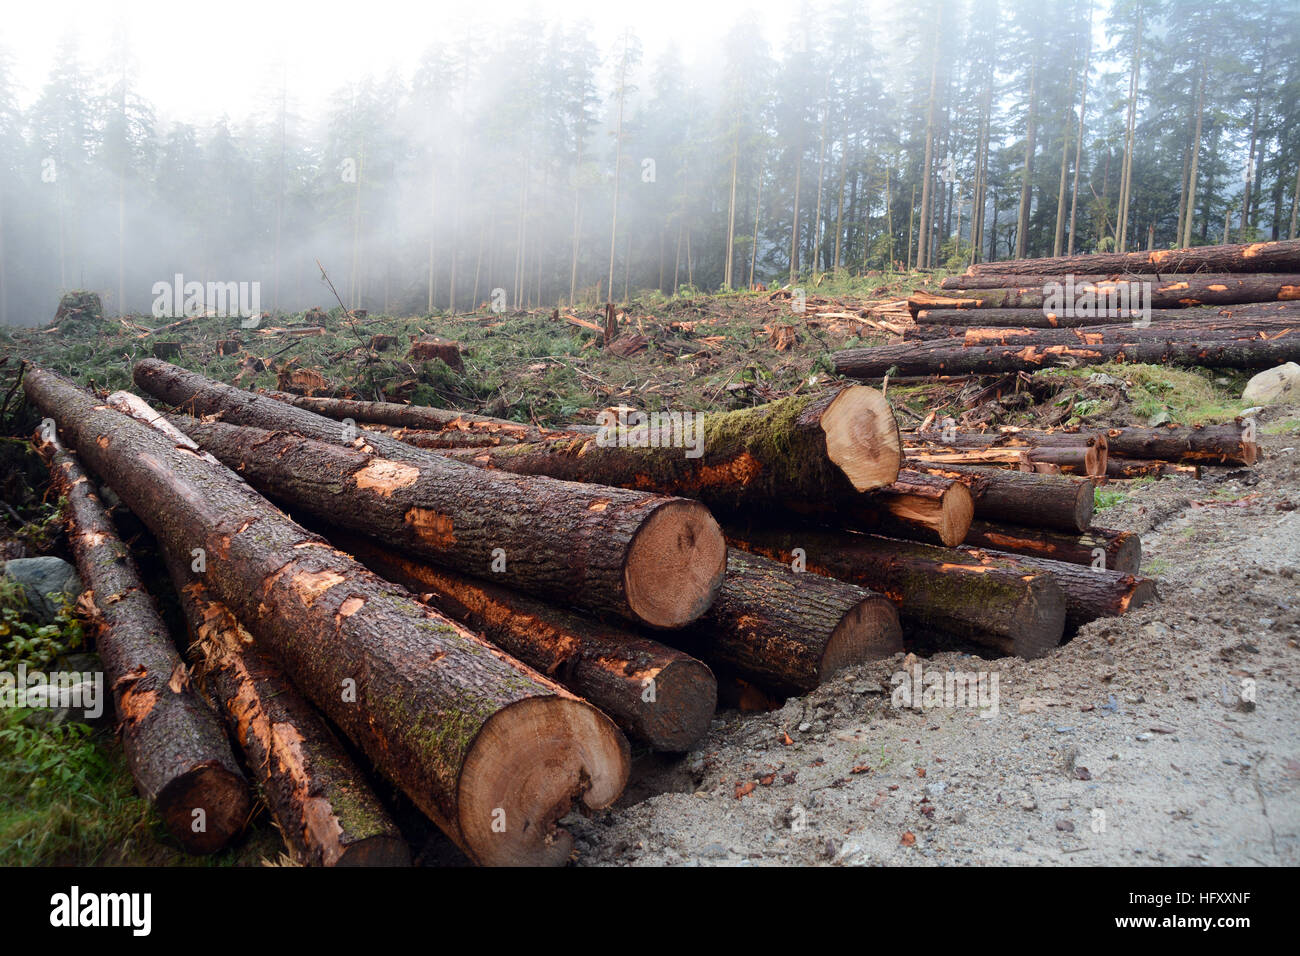 A pile of tree logs at a clearcut site on a logging road in the Coast Mountains near Mission, British Columbia, Canada. Stock Photo